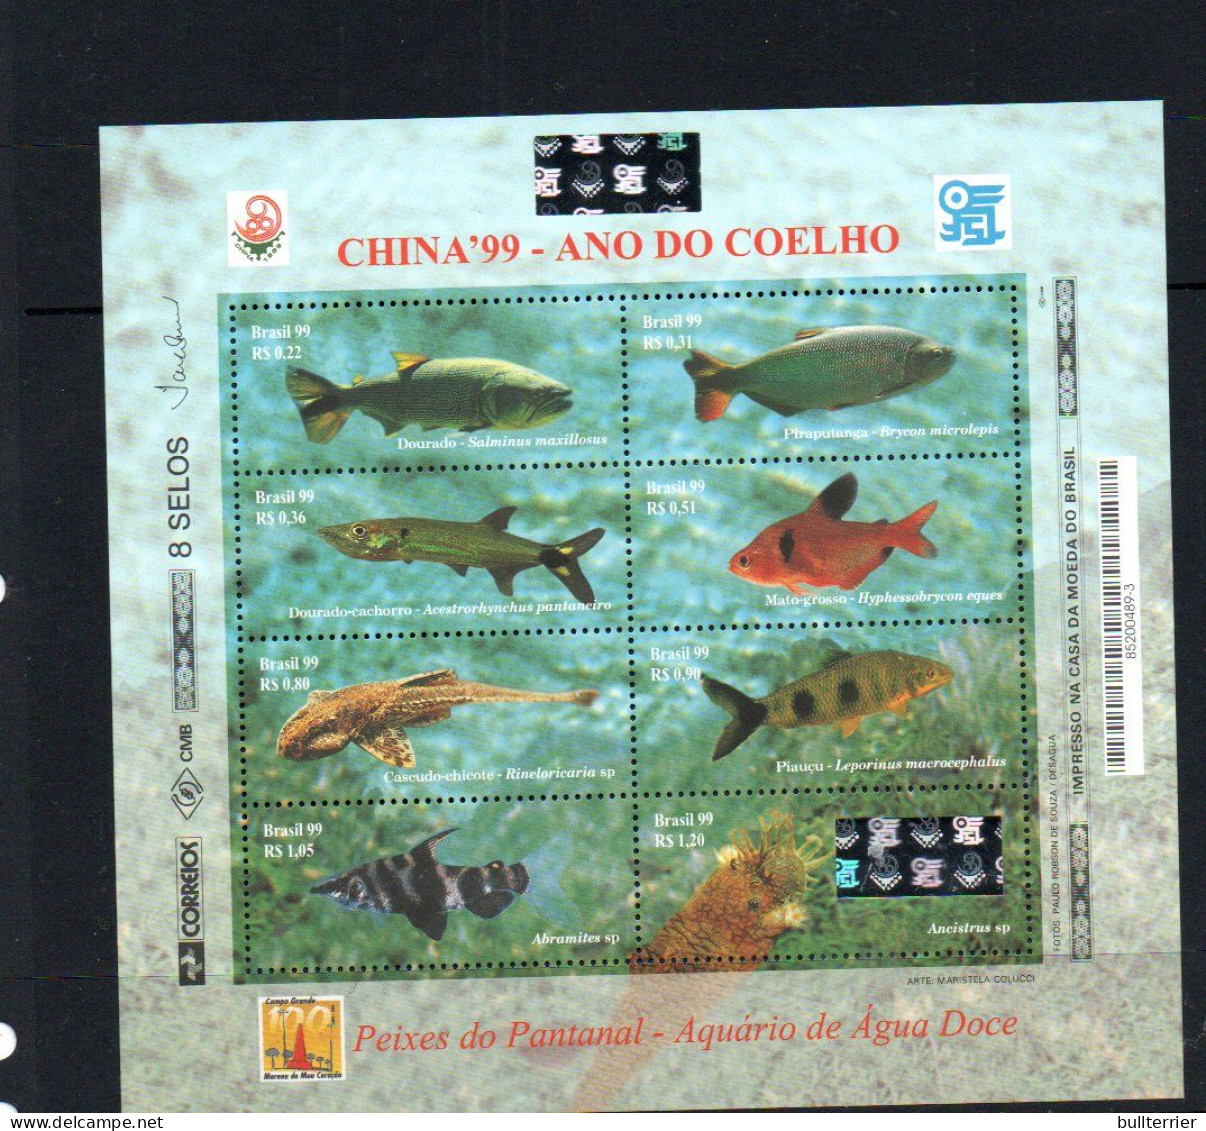 HOLOGRAMS - BRAZIL - 1999- CHINA EXPO FISHES SHEETLET OF 8 MINT NEVER HINGED - Hologrammen